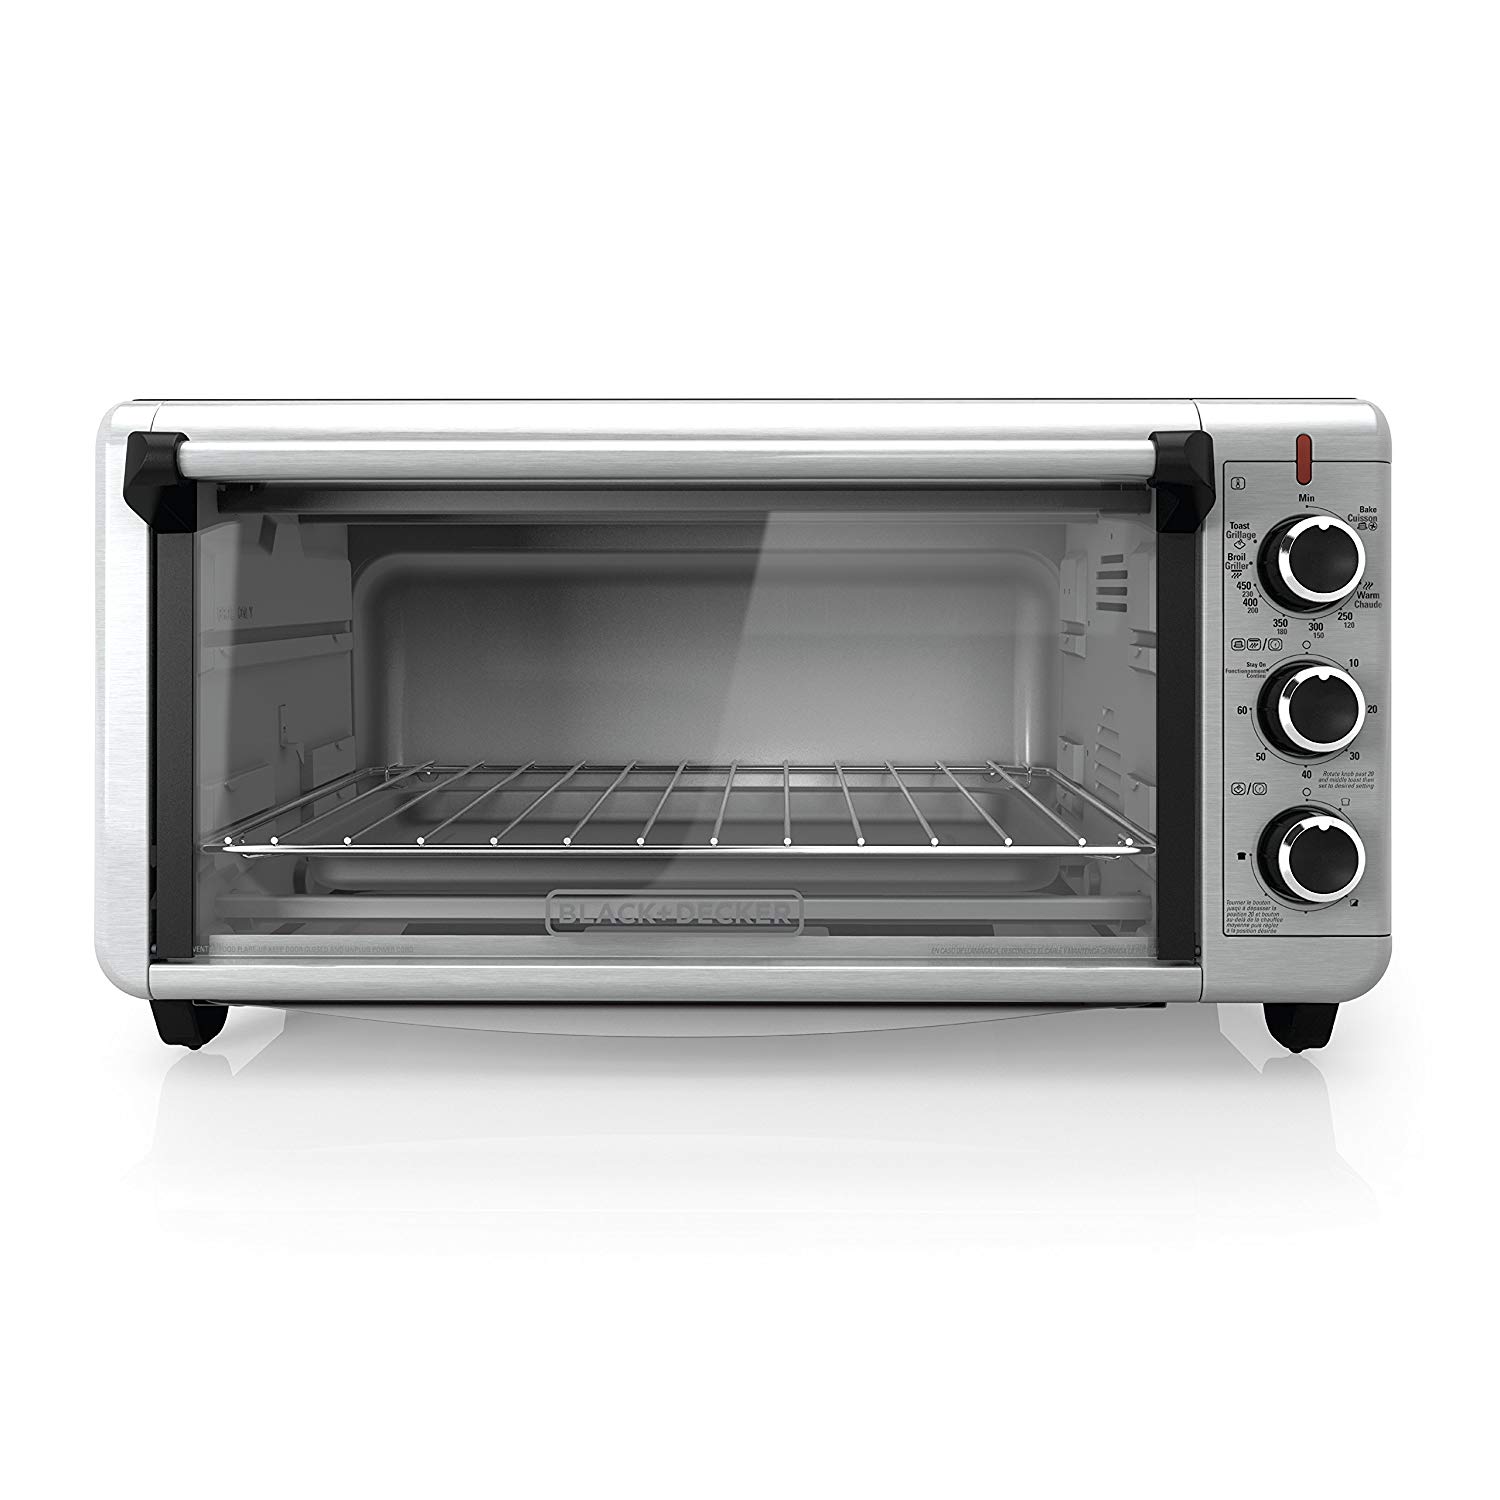 An image of Black and Decker TO3240XSBD Black Stainless Steel Convection Countertop Extra Wide Eight Slice Toaster Oven